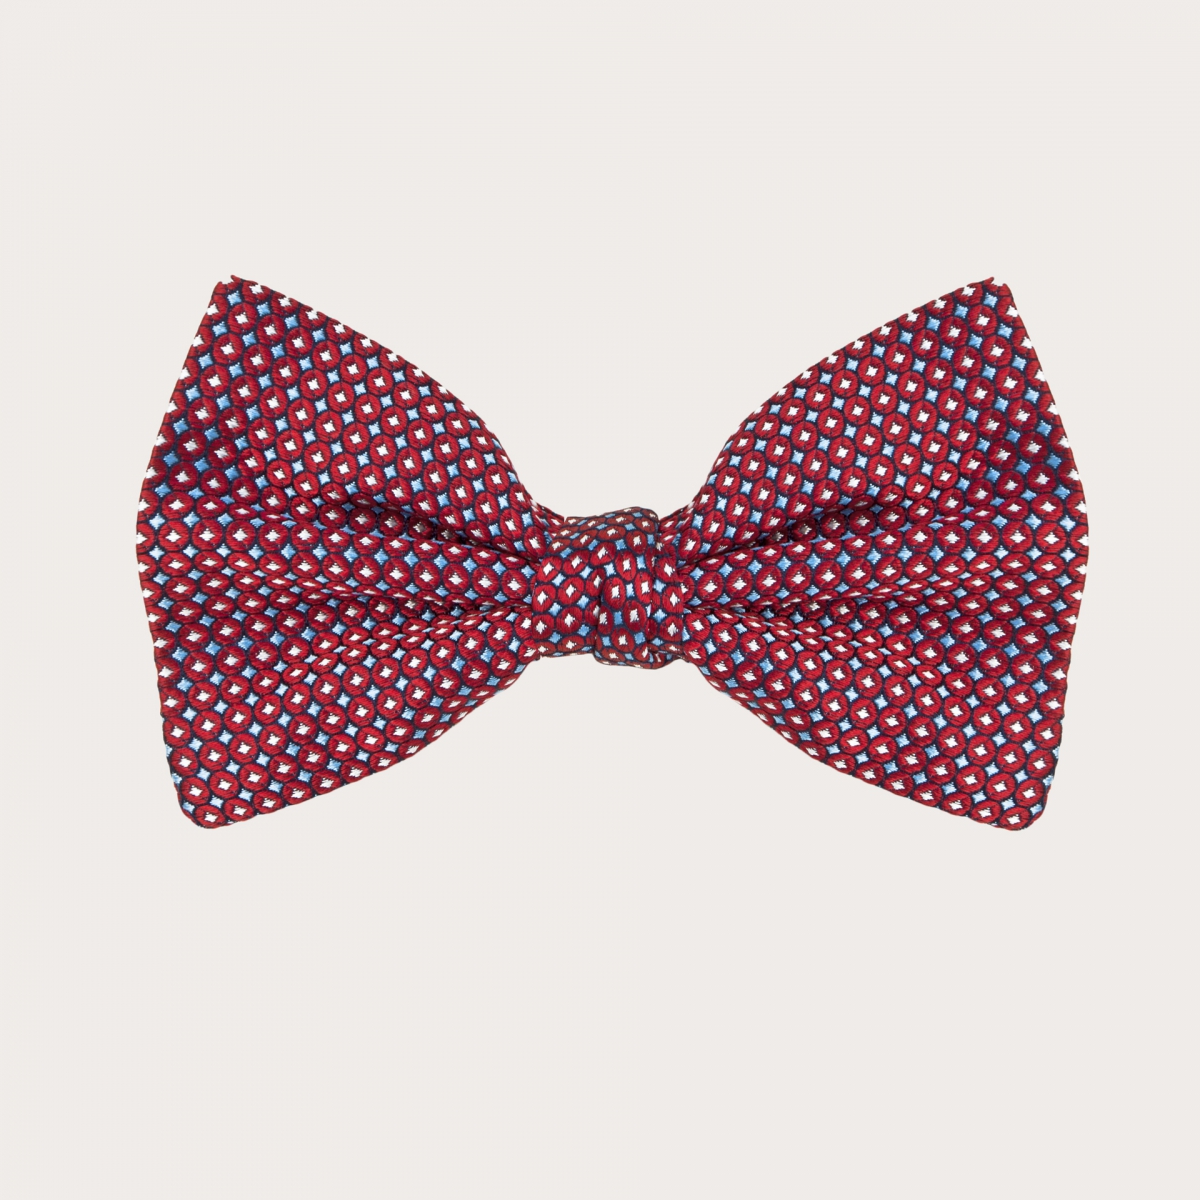 BRUCLE Ceremony bow tie in jacquard silk, red and blue geometric pattern